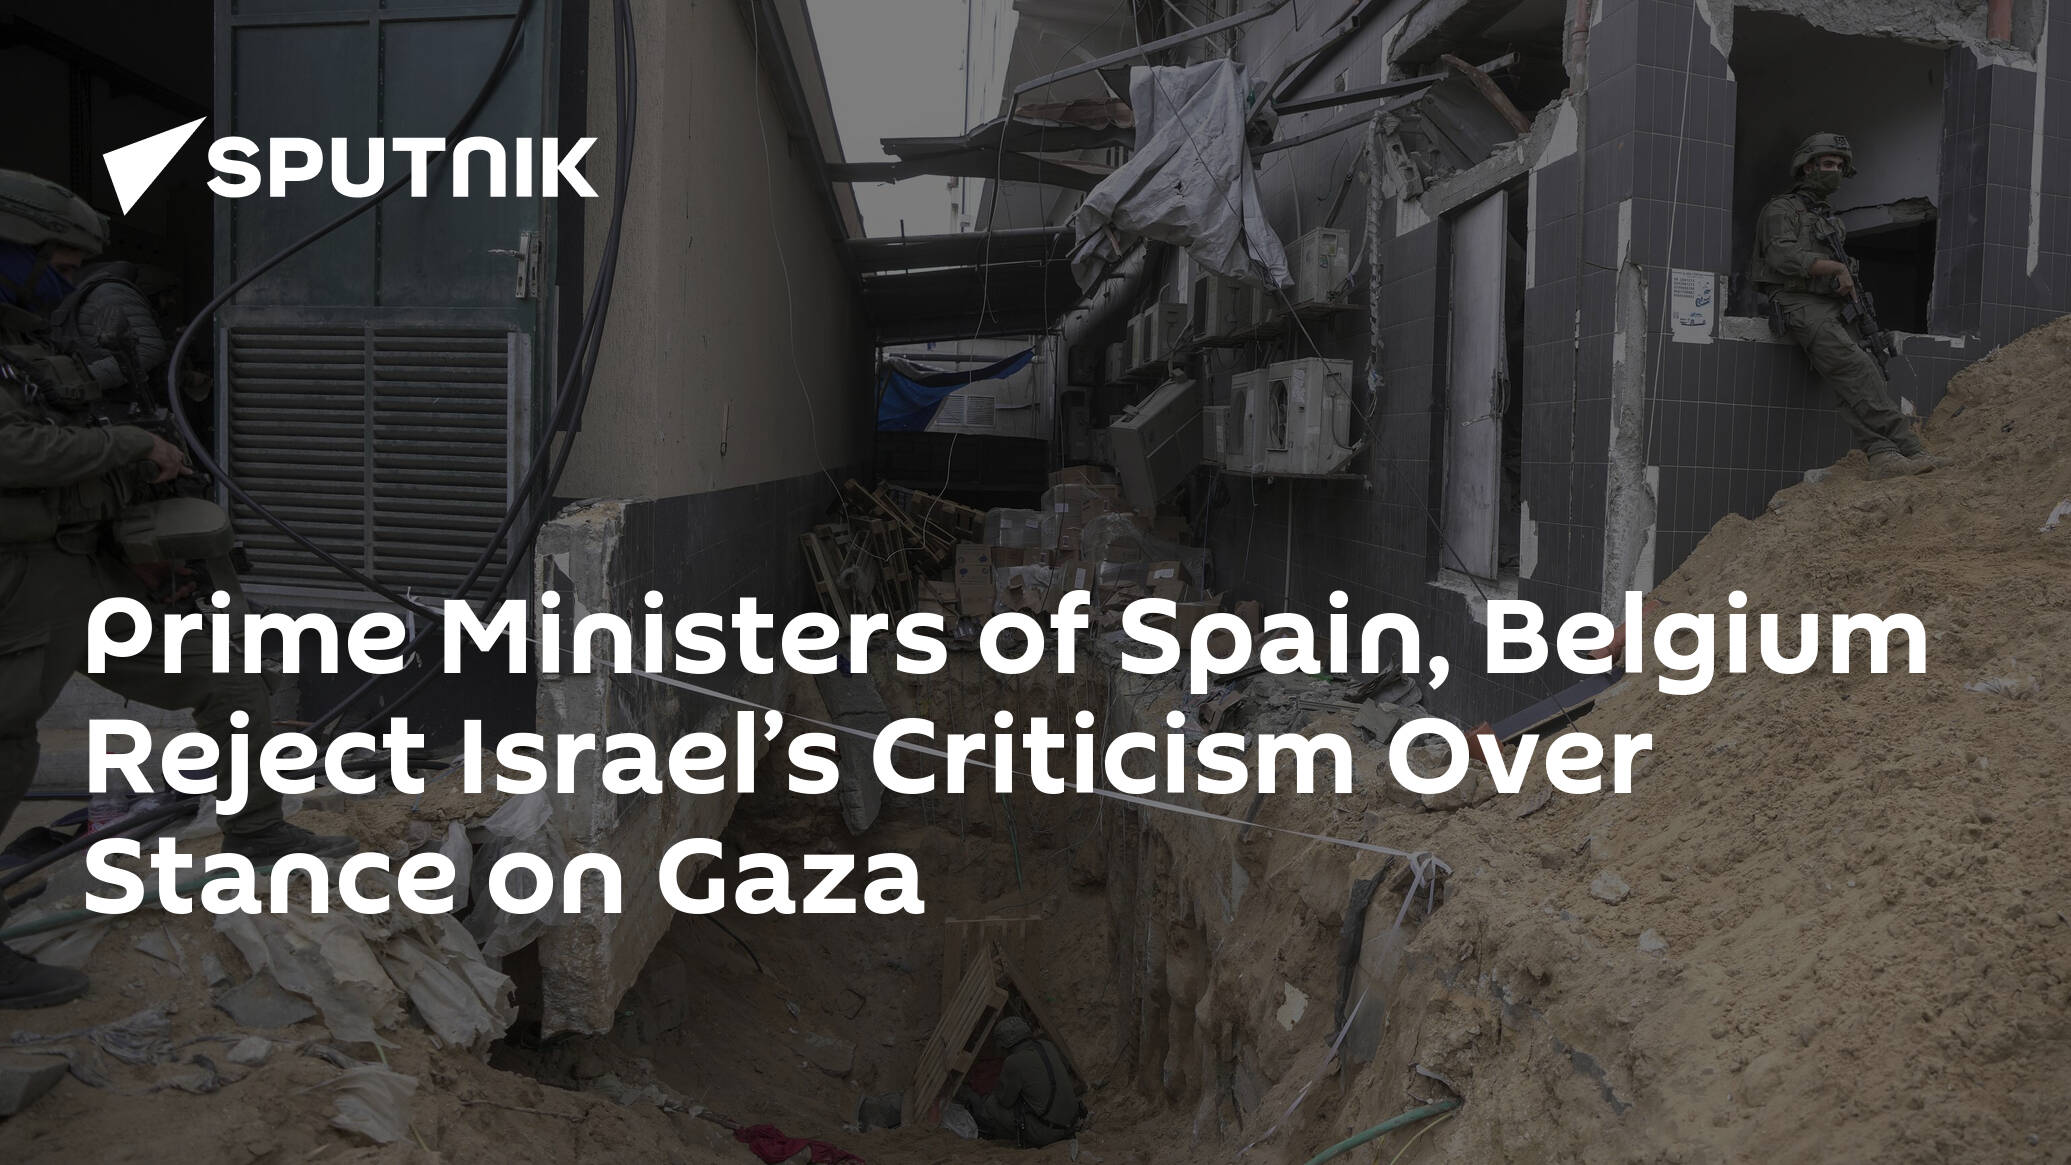 Prime Ministers of Spain, Belgium Reject Israel’s Criticism Over Stance on Gaza